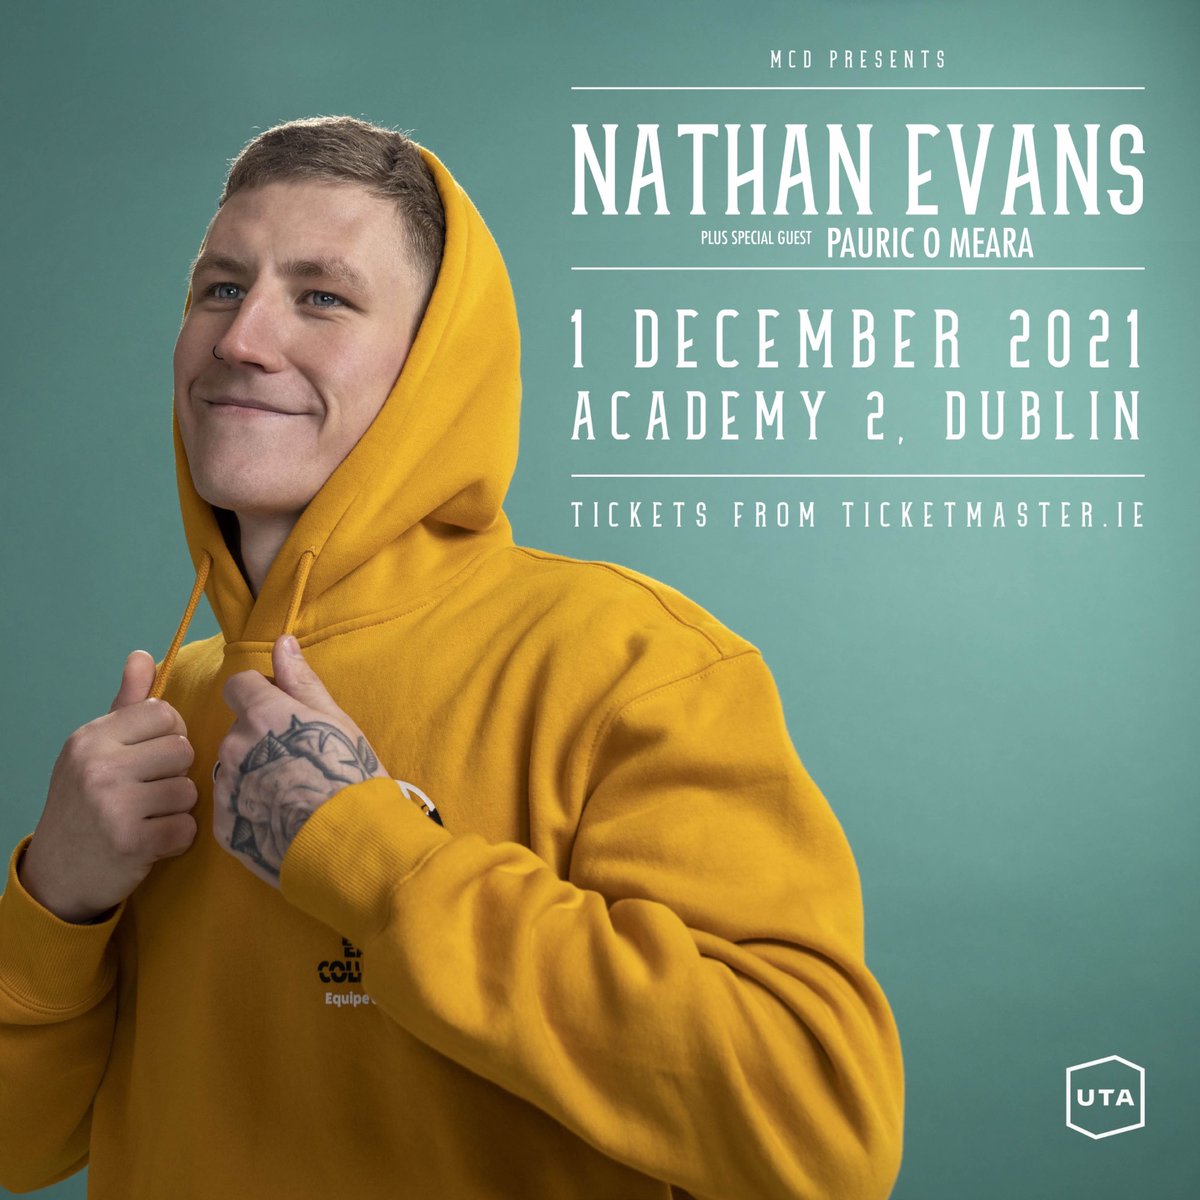 UPDATE // @pauric_o_muso_ will support @NathanDawe at his Academy 2 show on 1st December Remaining tickets on sale now from @TicketmasterIre